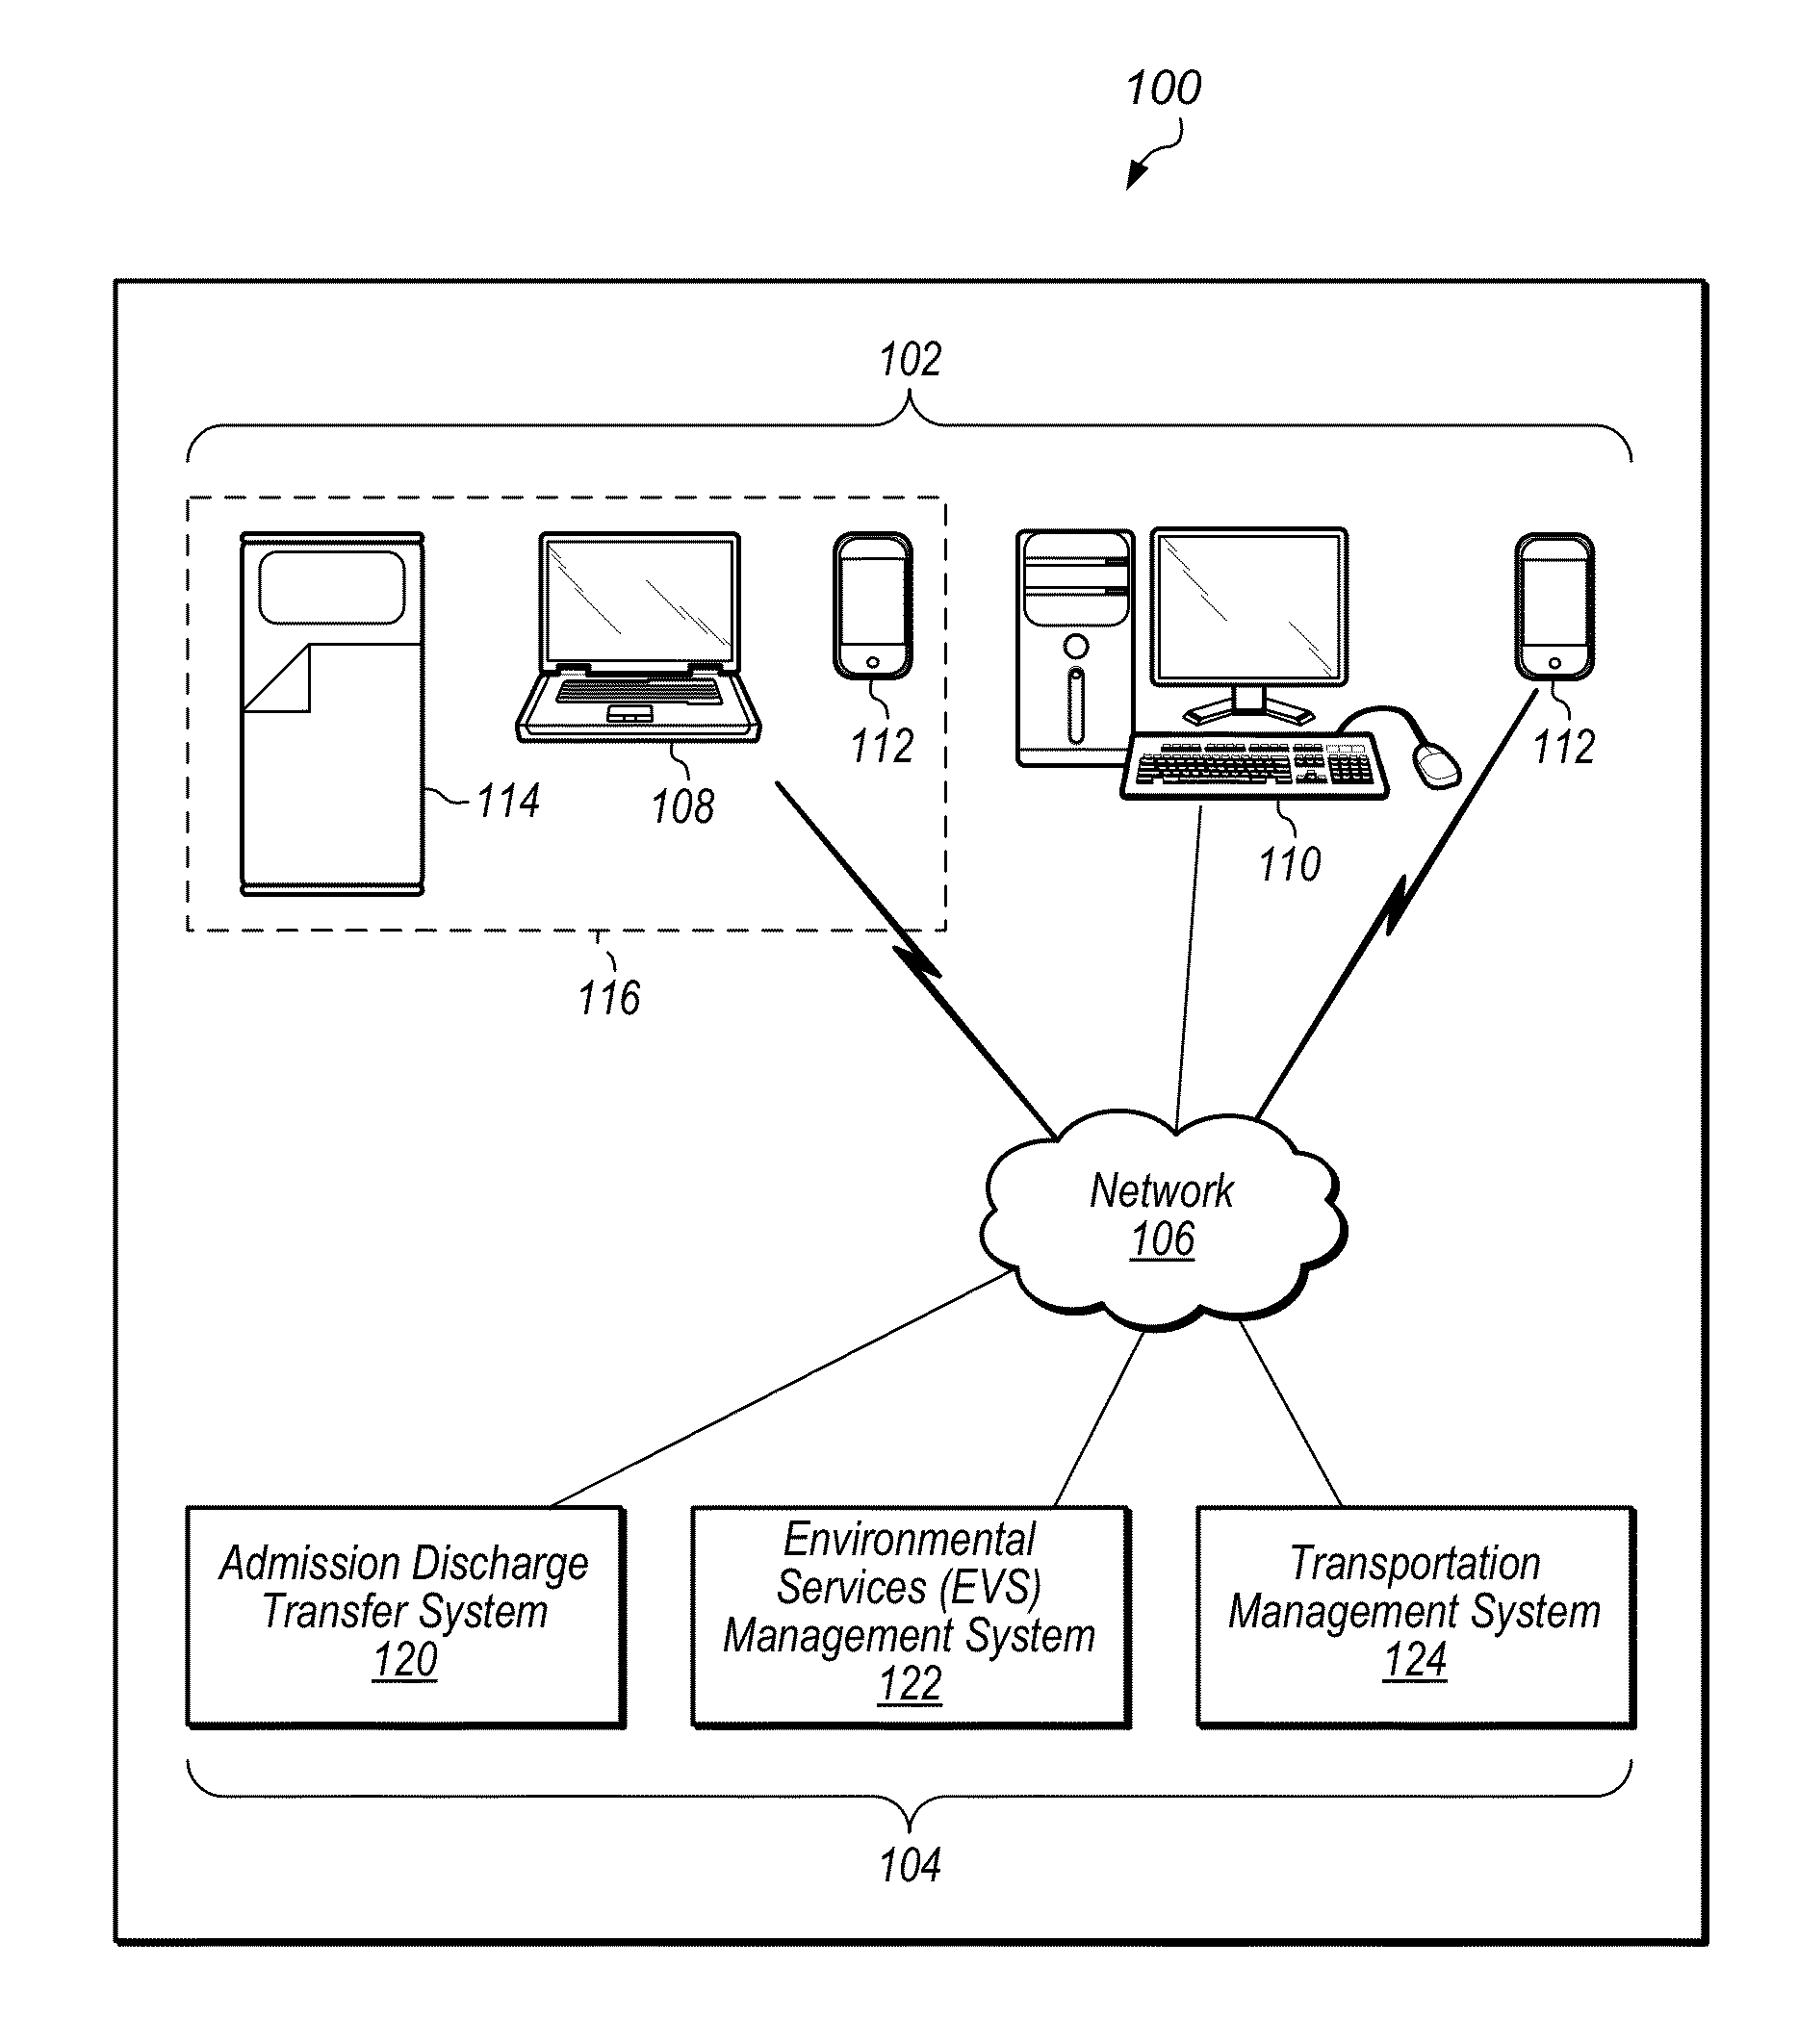 System and methods for providing transportation services in health care facilities